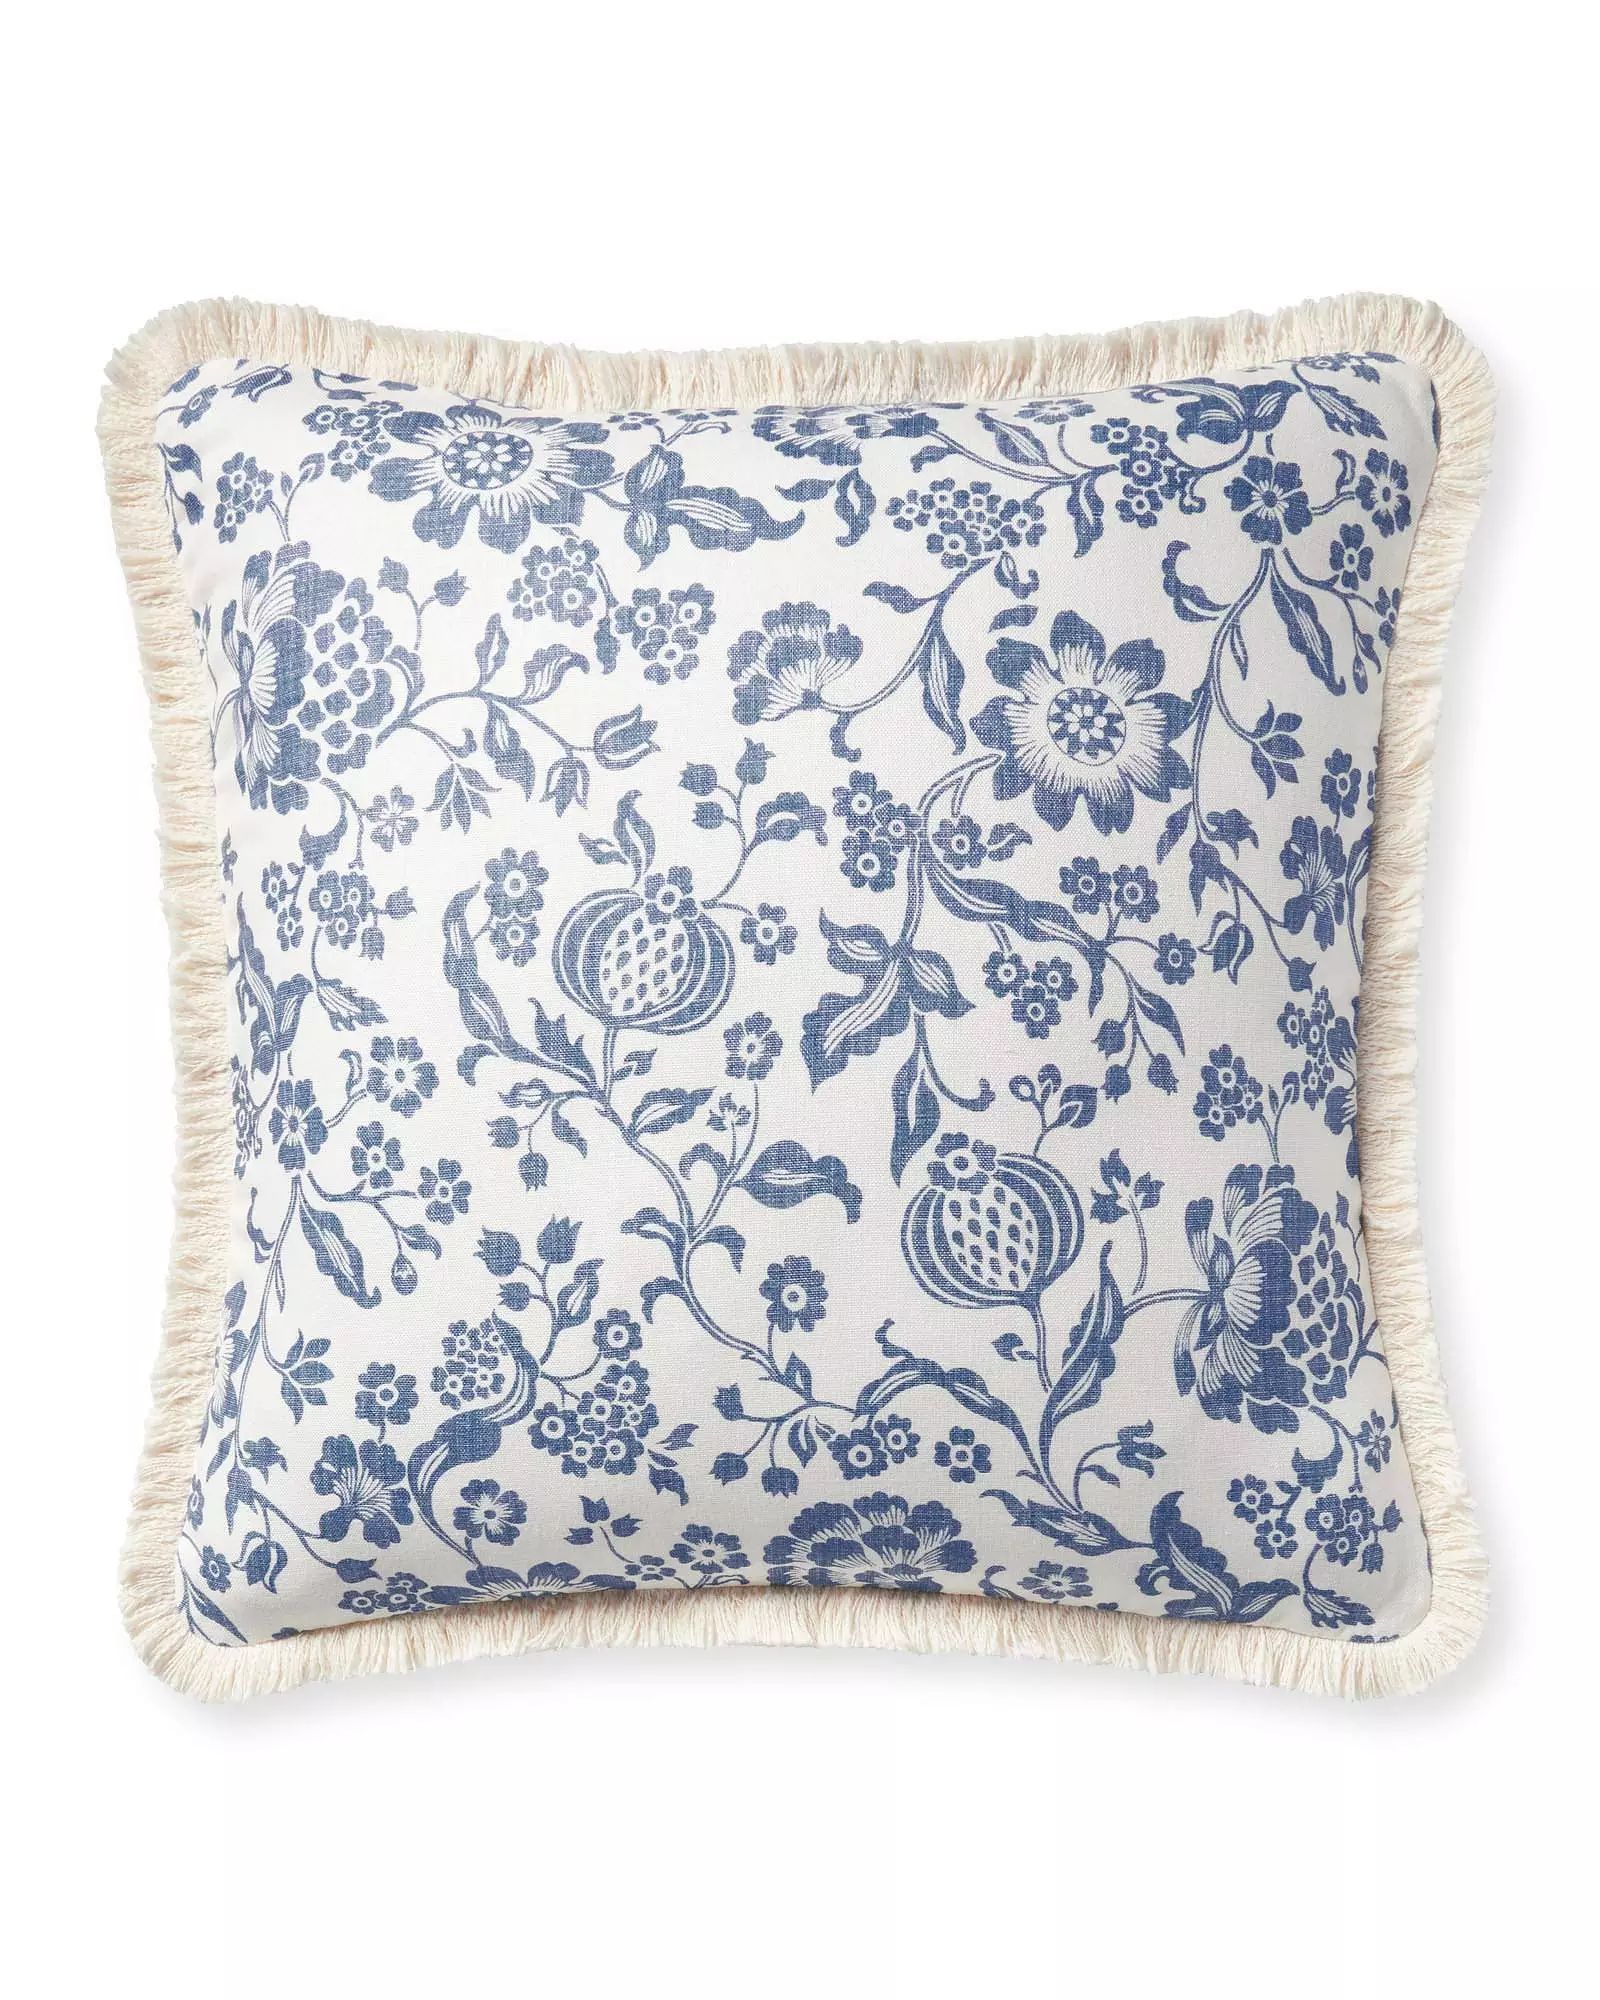 Claremont Pillow Cover | Serena and Lily